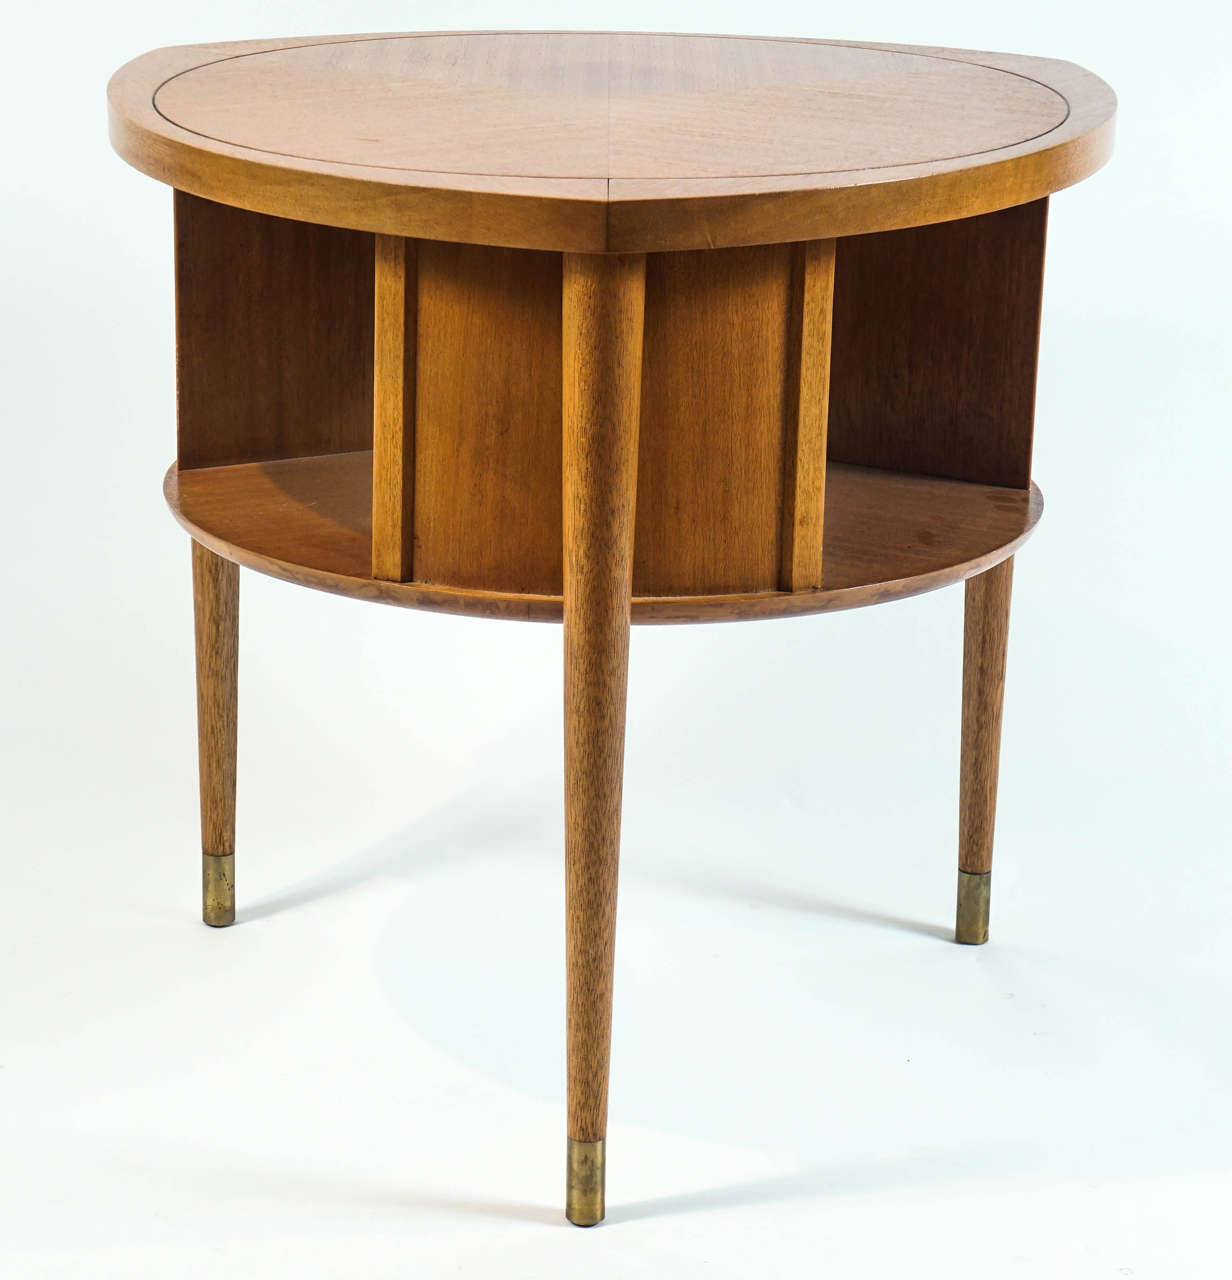 A tricorn-shaped piecrust veneered top atop a circular rotating book shelf that sits on tapered legs with brushed brass sabots. Marked 